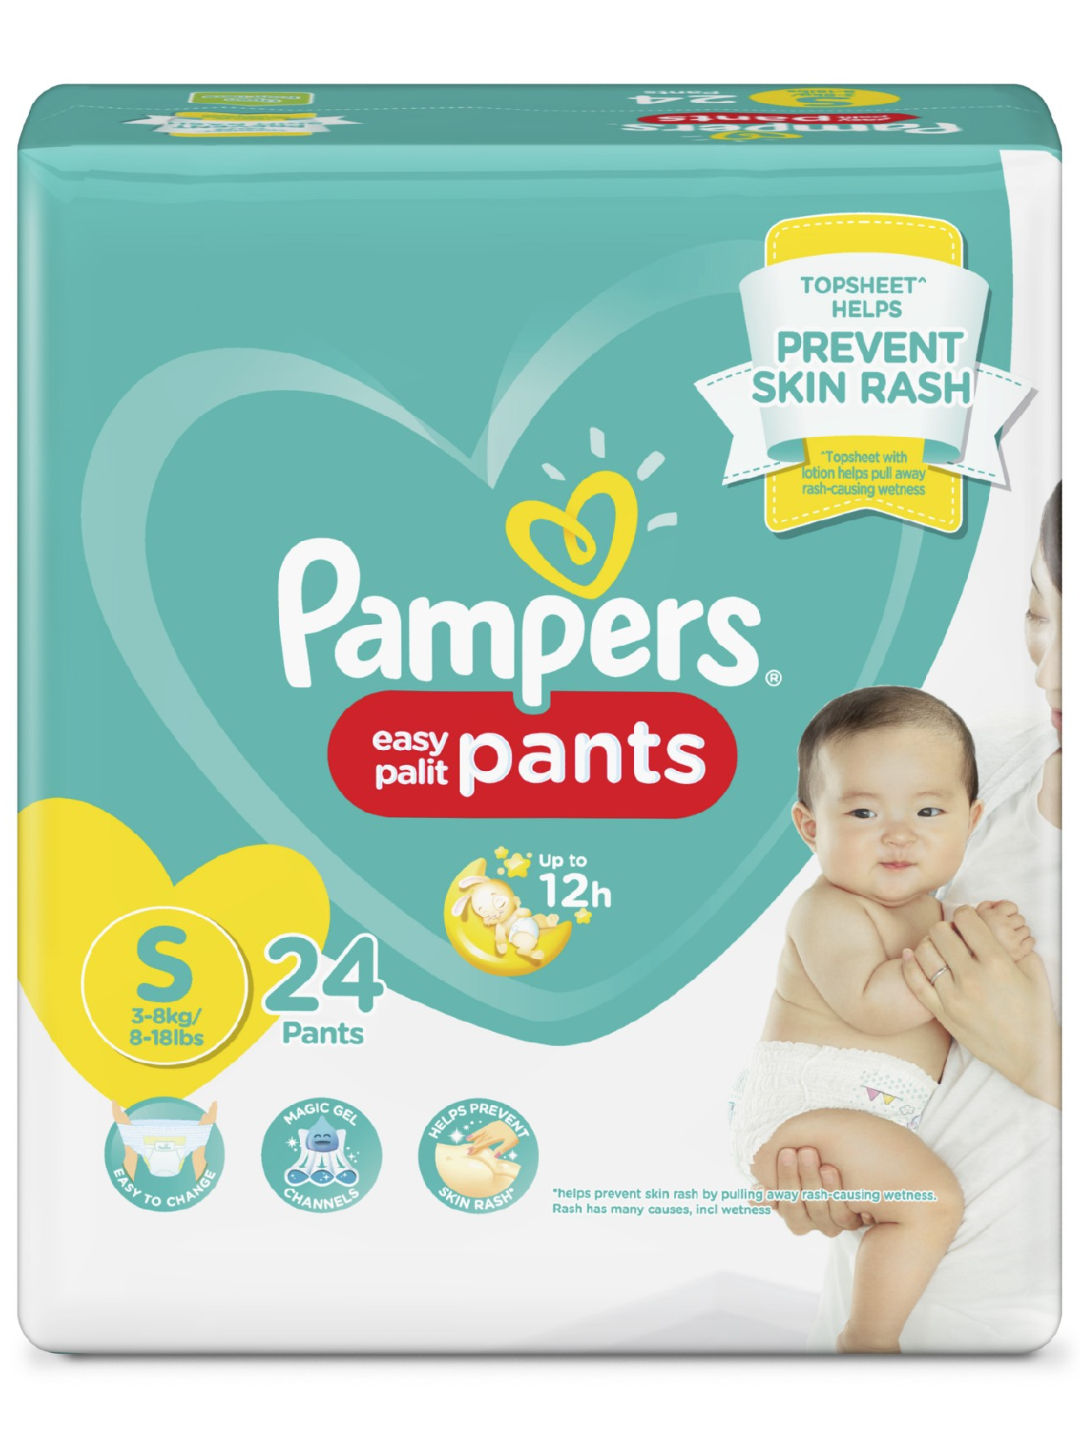 Pampers Pant Style Diapers Small Size, 9 Pants